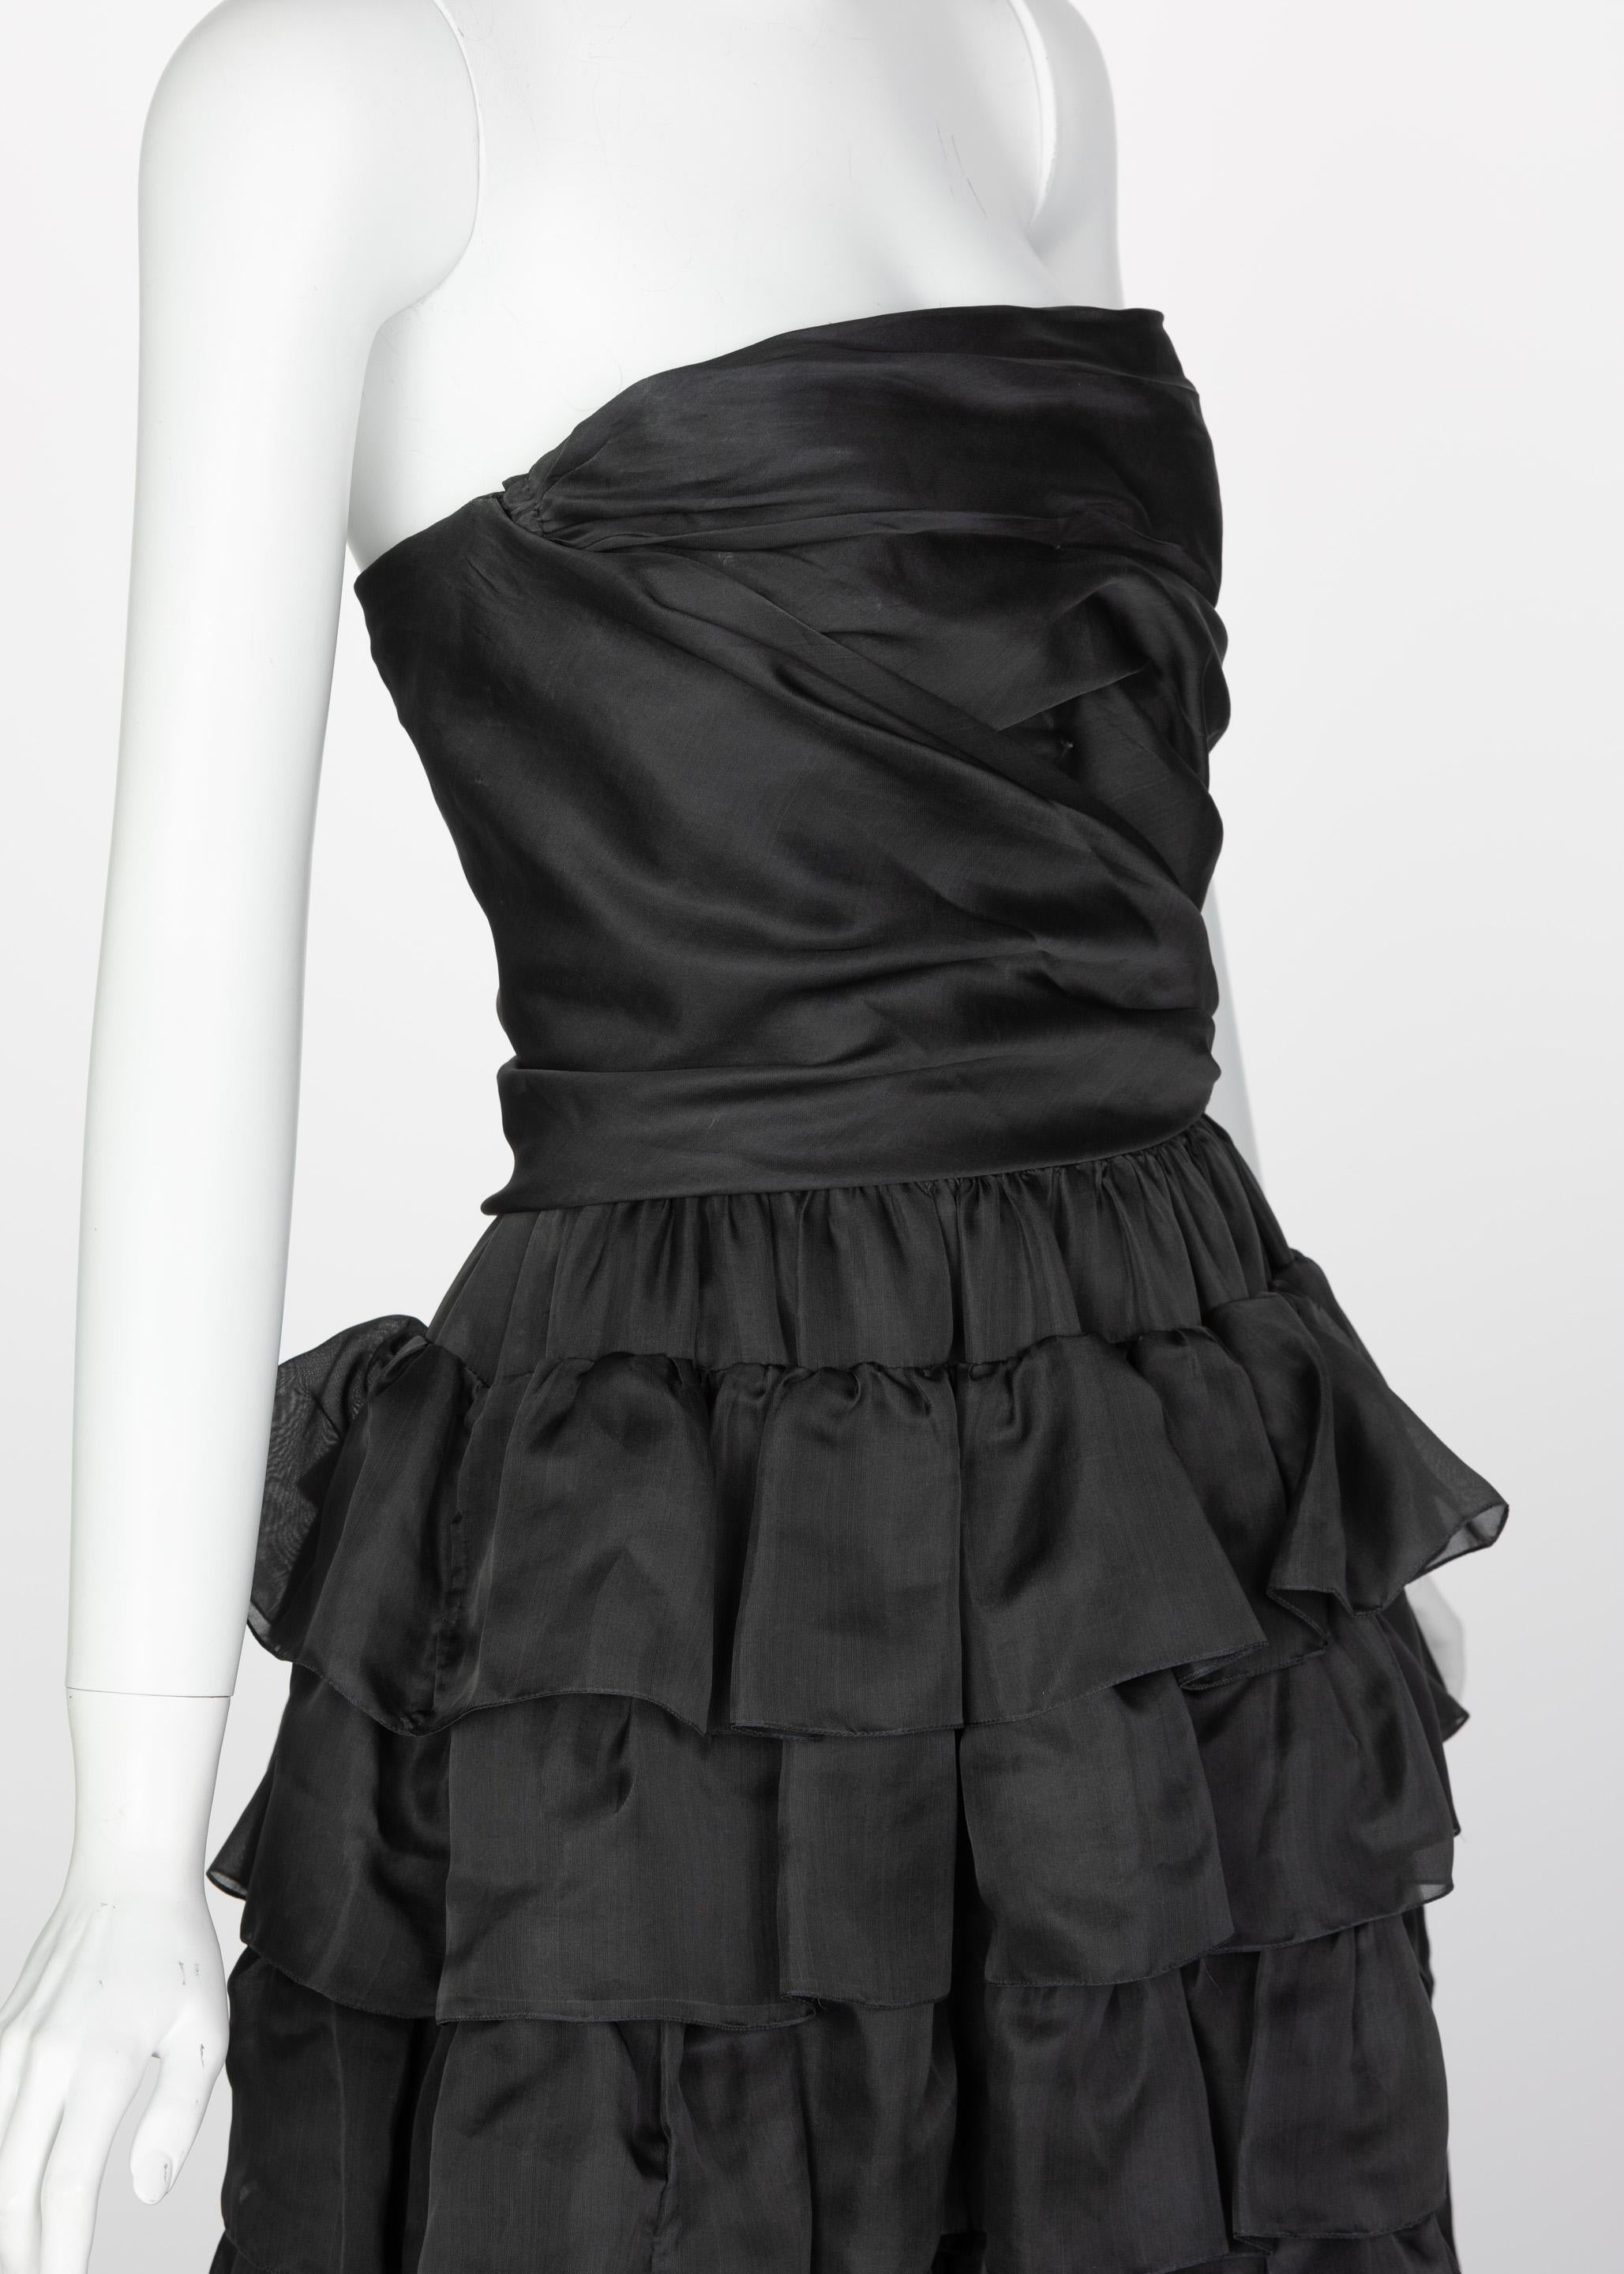 Vintage Givenchy Numbered Haute Couture Black Strapless Ruffled Gown, 1970s 3